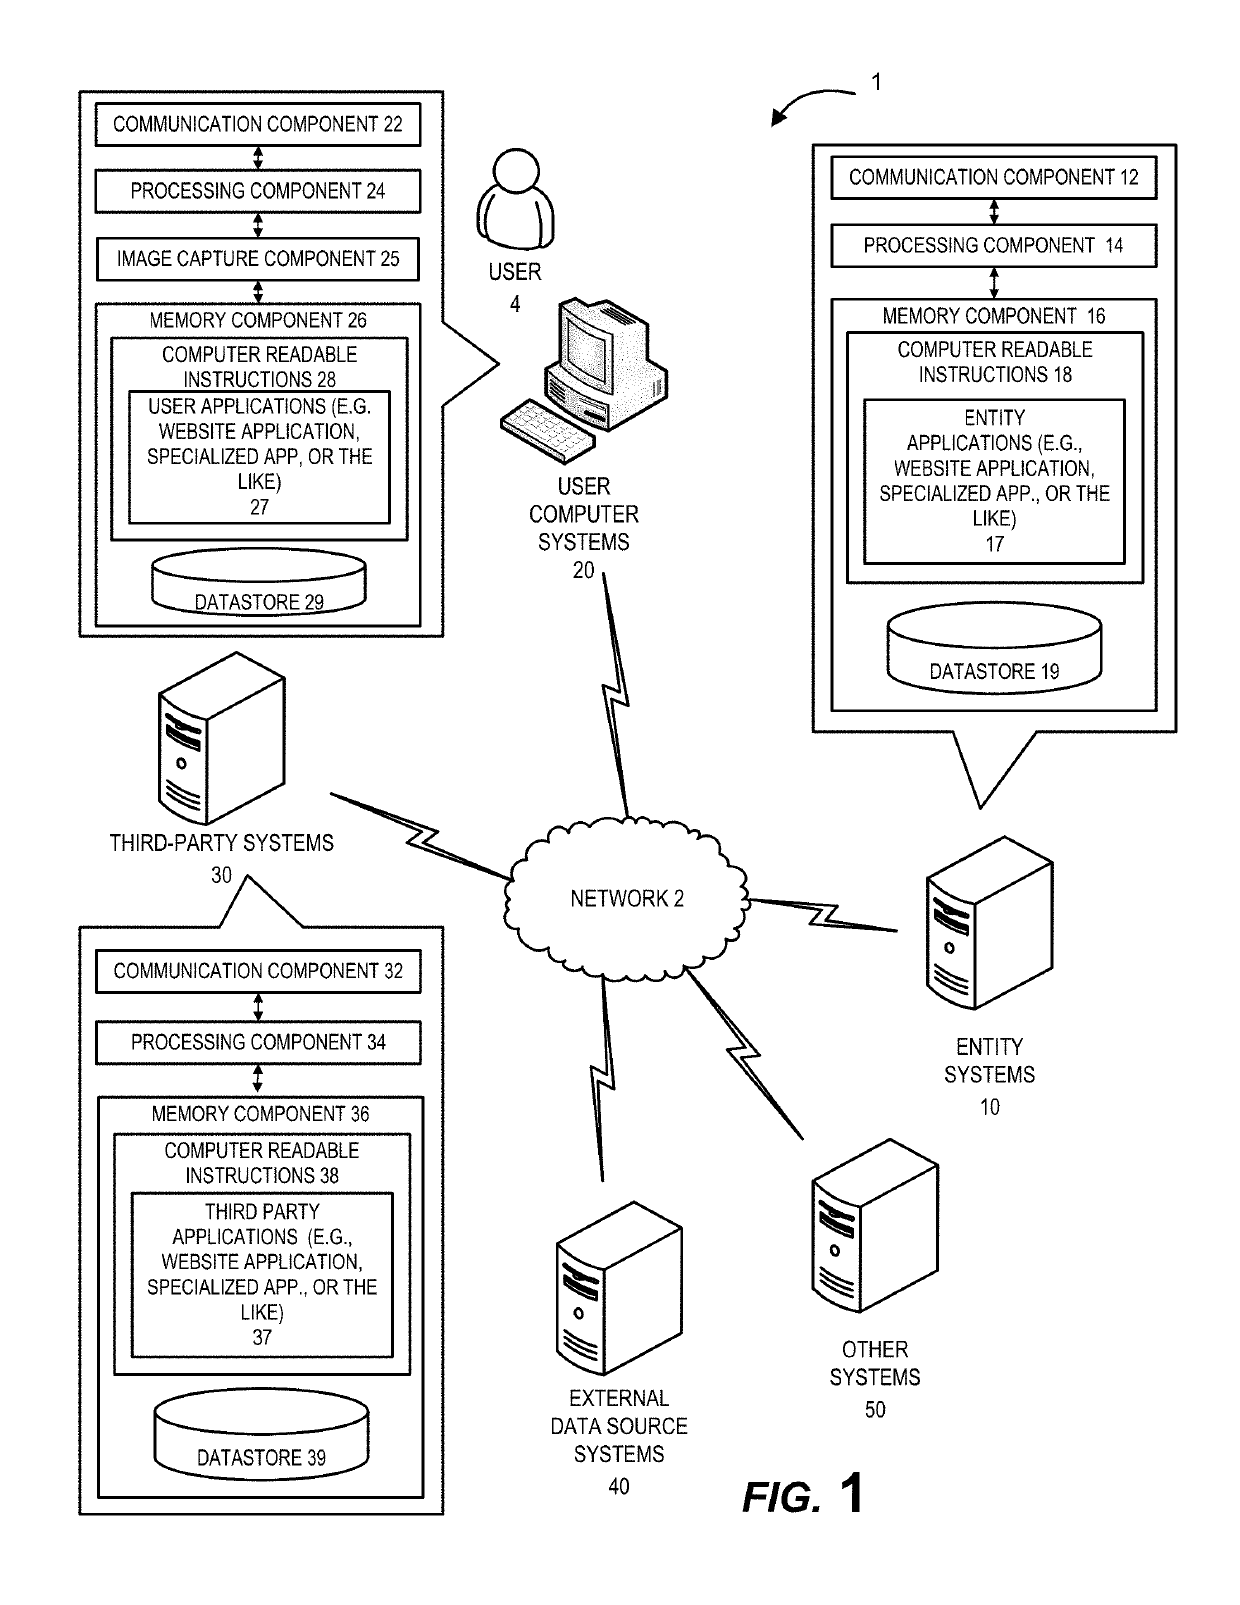 System for generating a communication pathway for third party vulnerability management